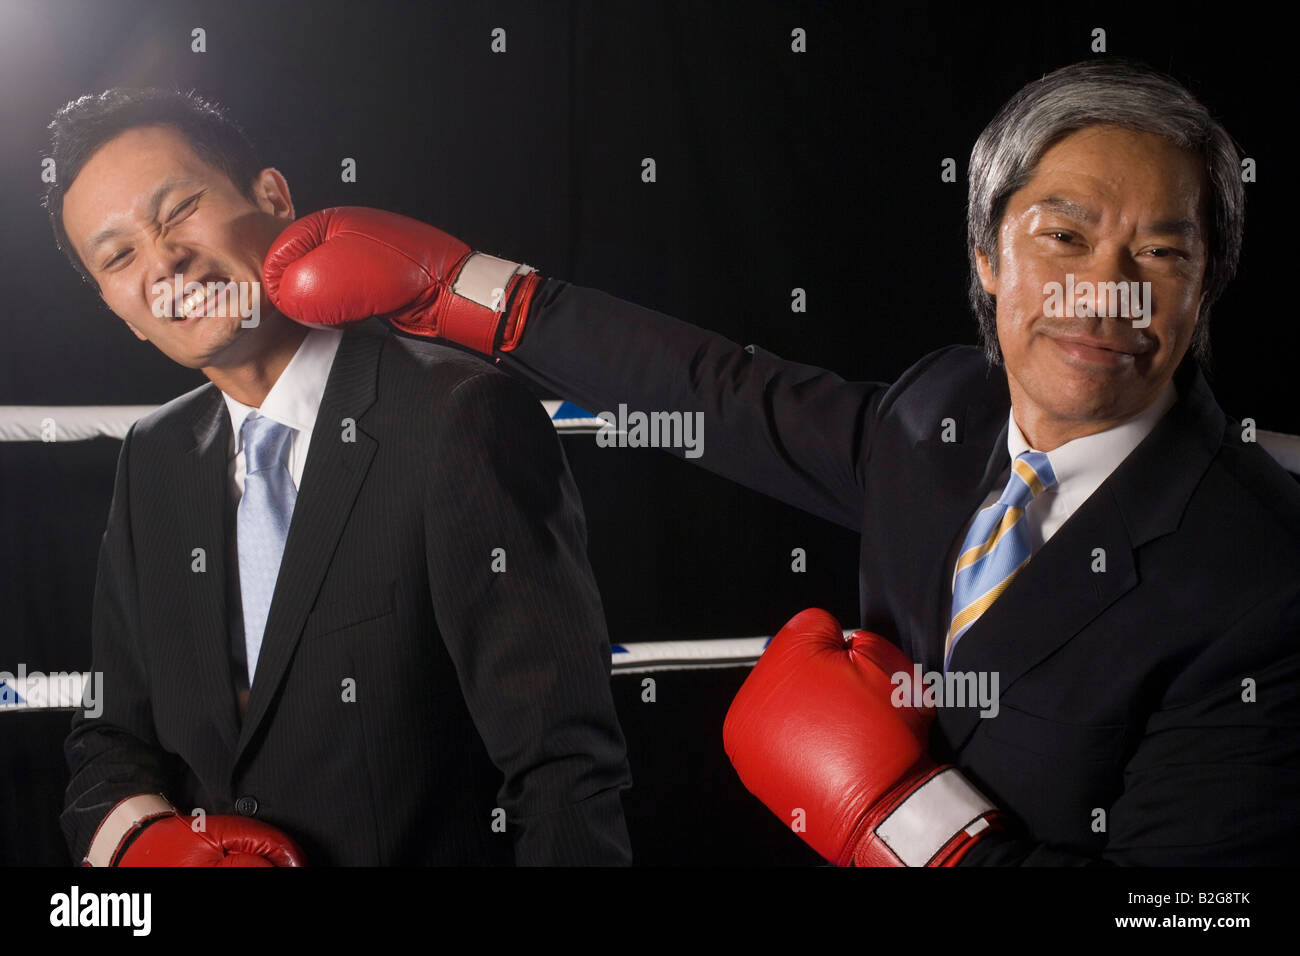 Two businessmen fighting in a boxing ring Stock Photo